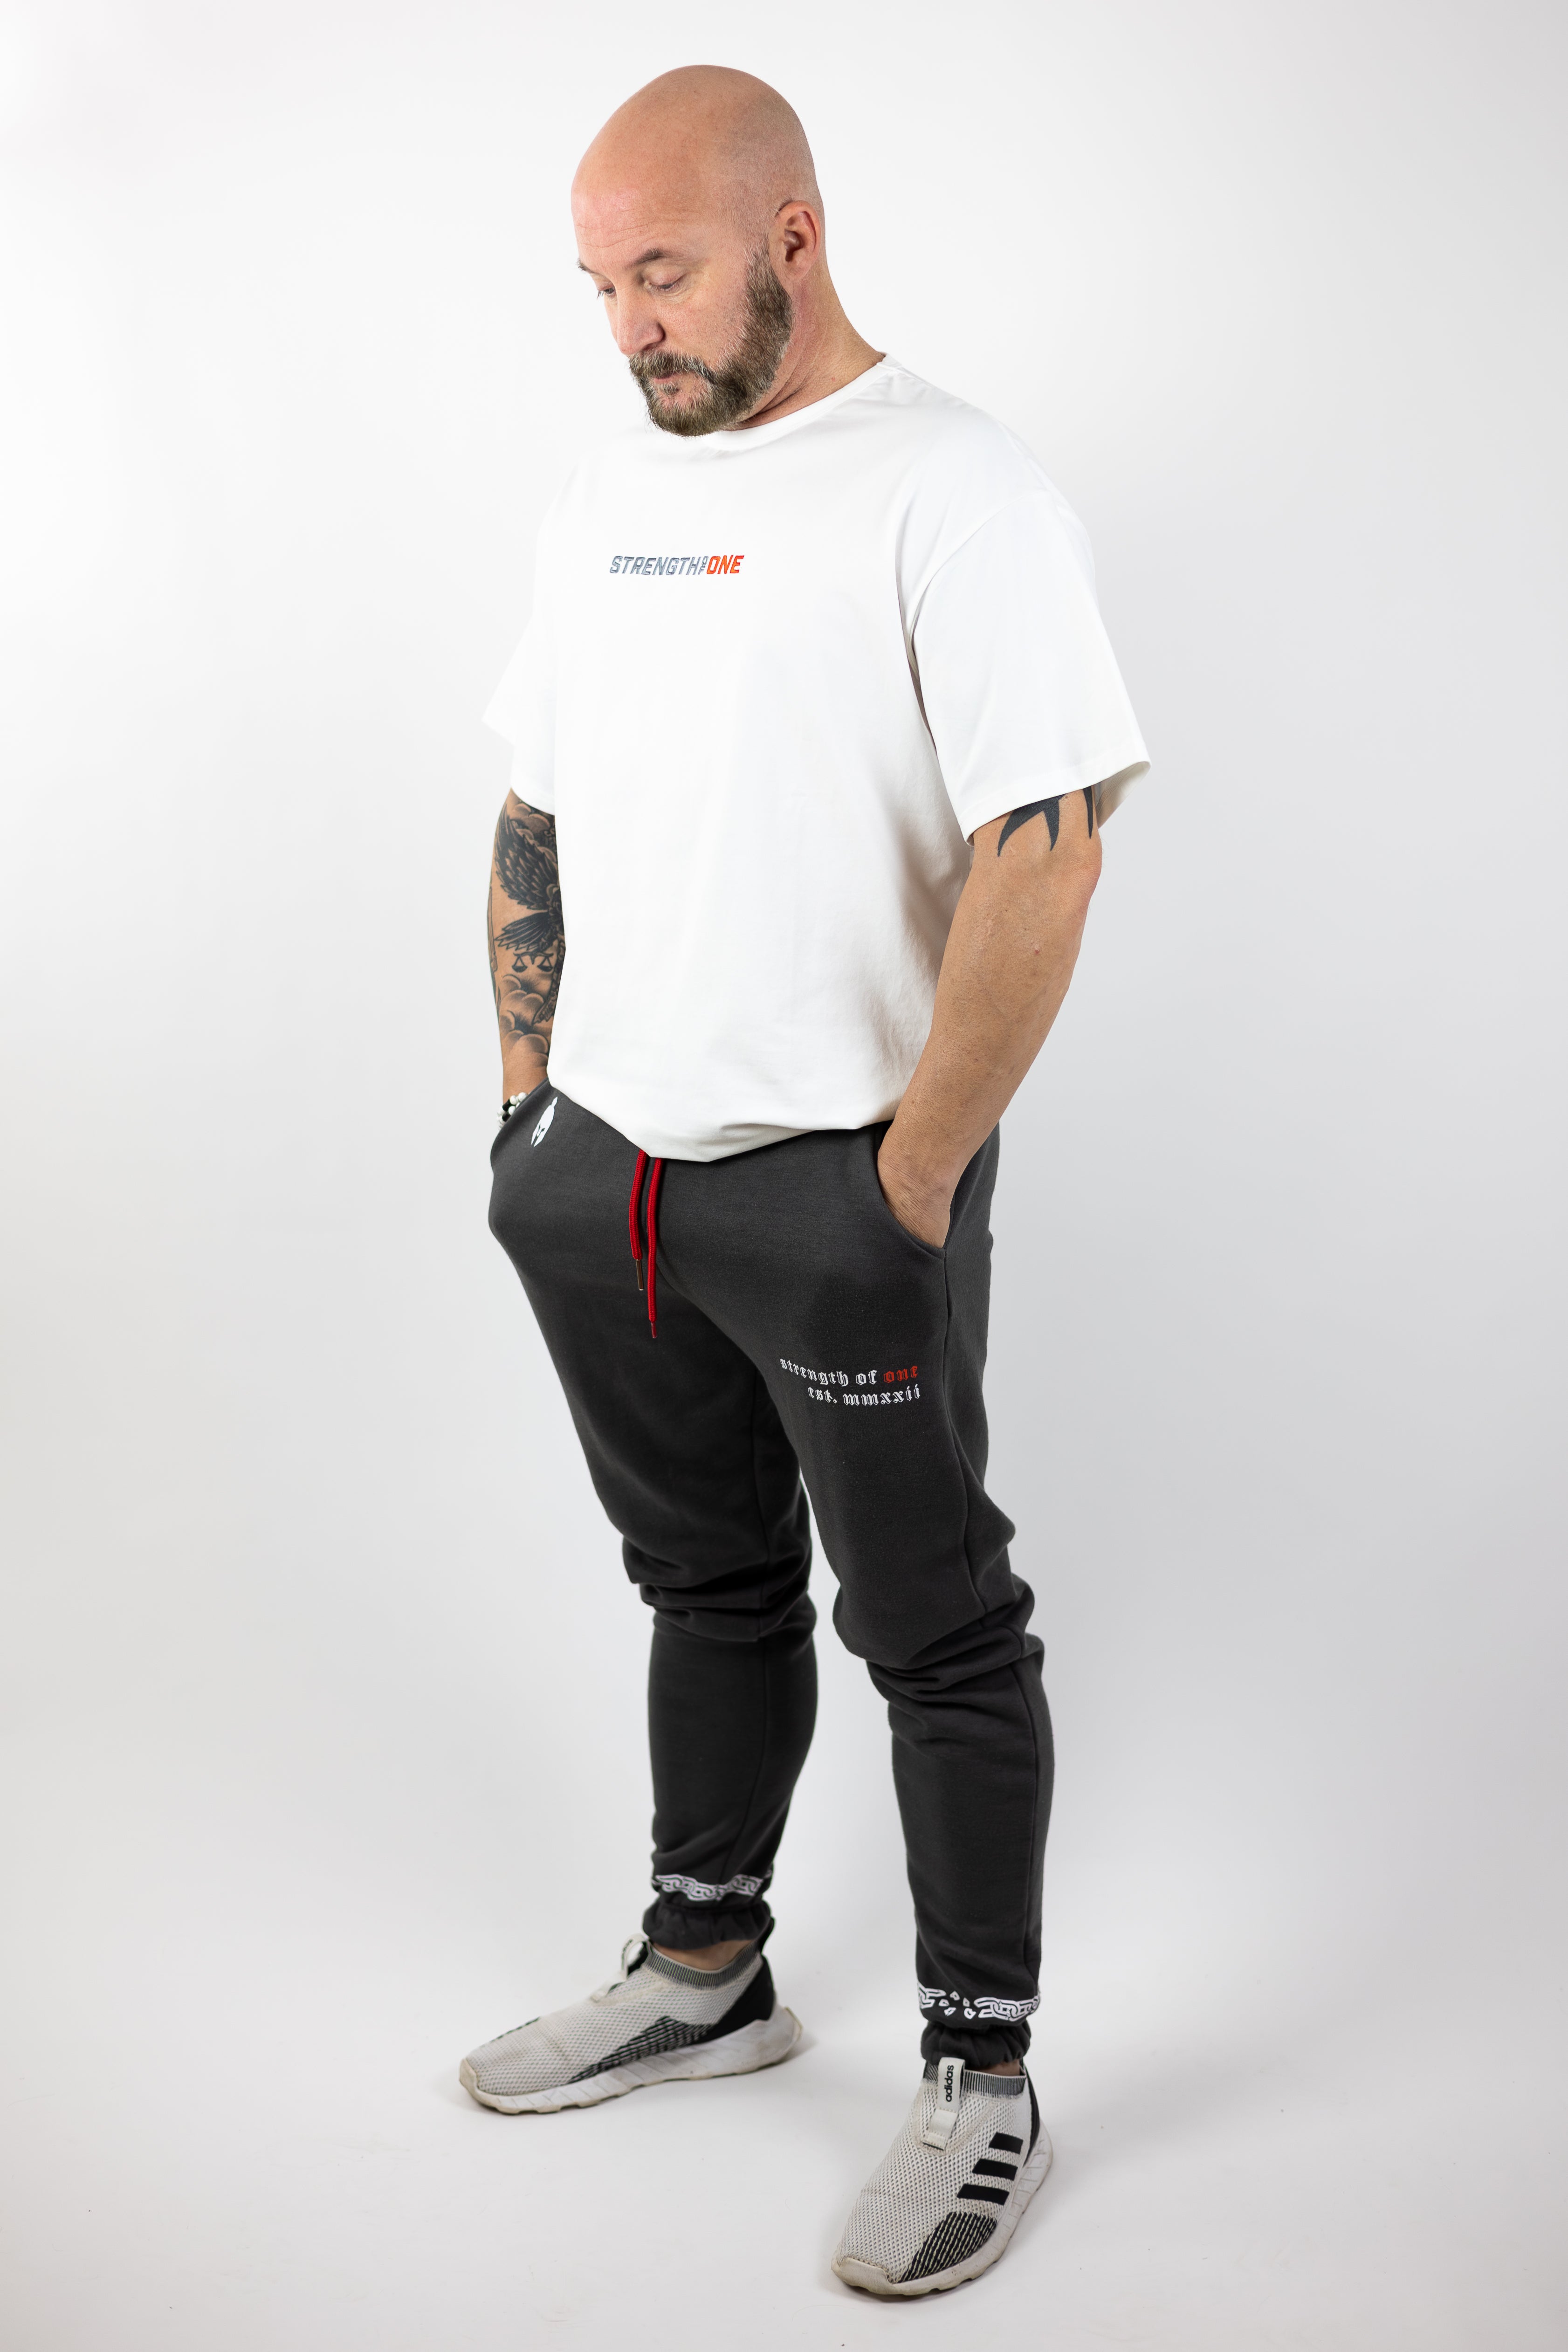 man modeling white Strength of One workout shirt with an embroidered logo reading Strength of One